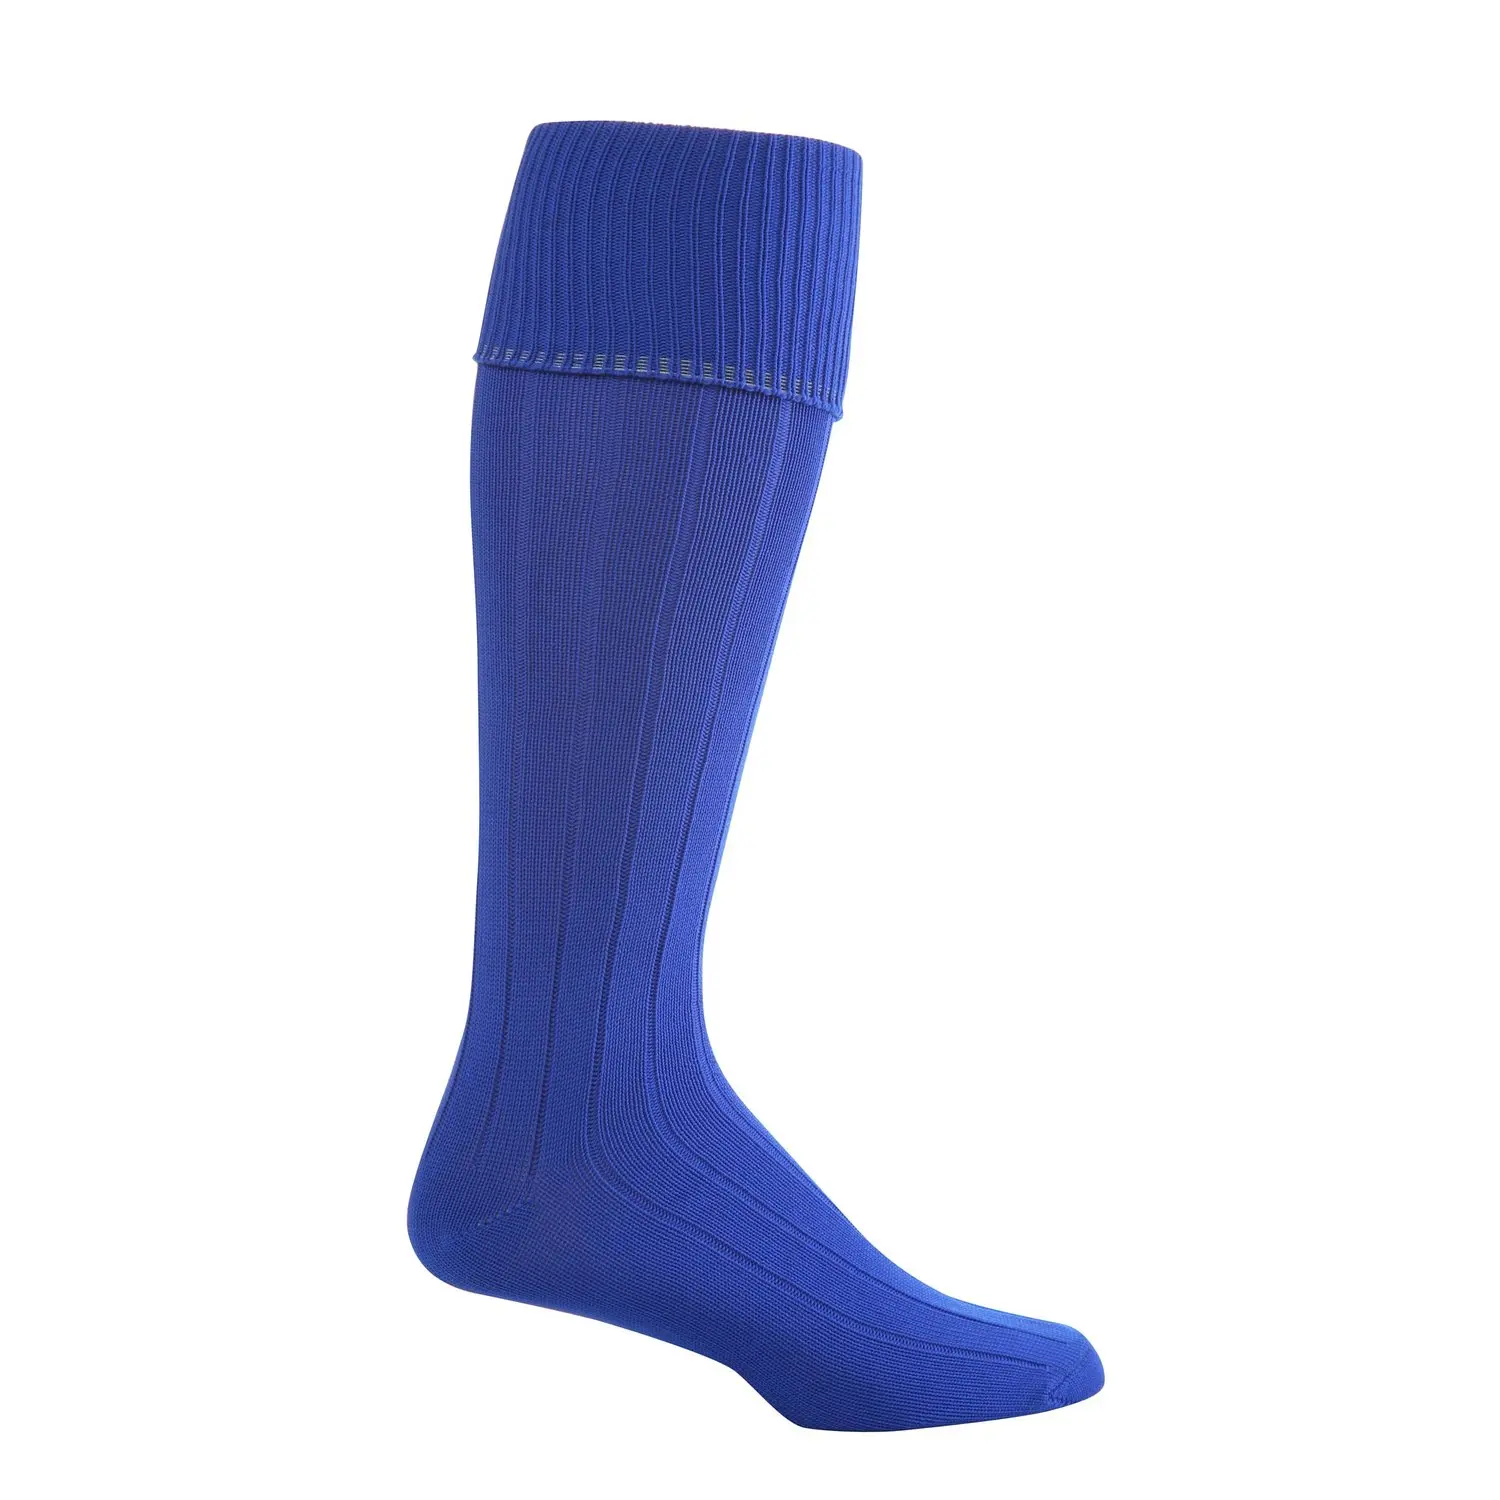 Cheap Mens Rugby Socks, find Mens Rugby Socks deals on line at Alibaba.com